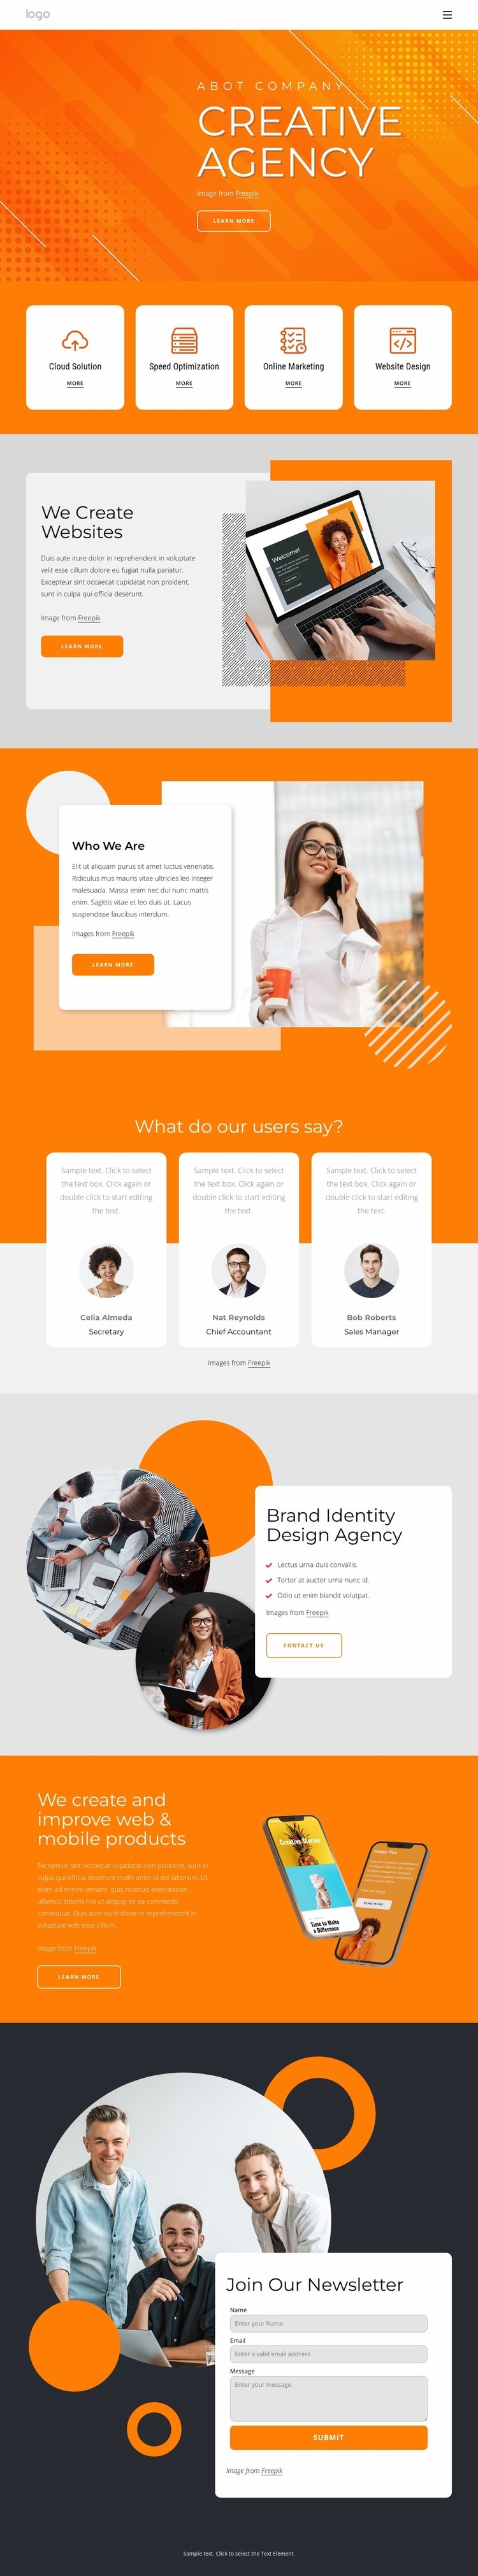 The creative agency for your next big thing Web Page Design